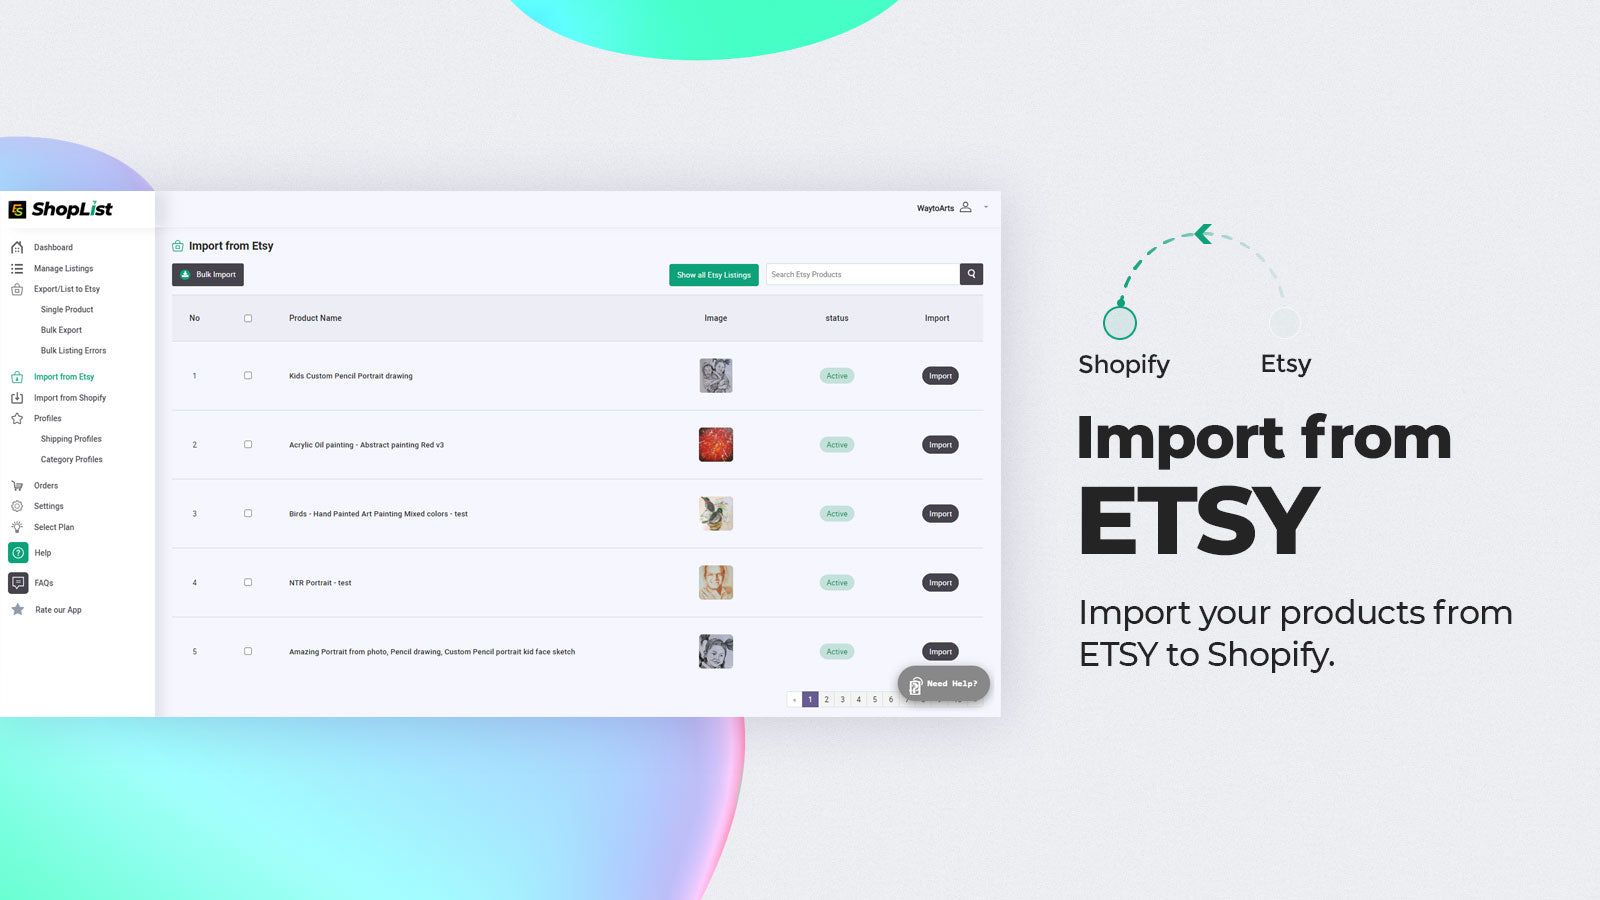 Import products from ETSY to Shopify - Etsy Import